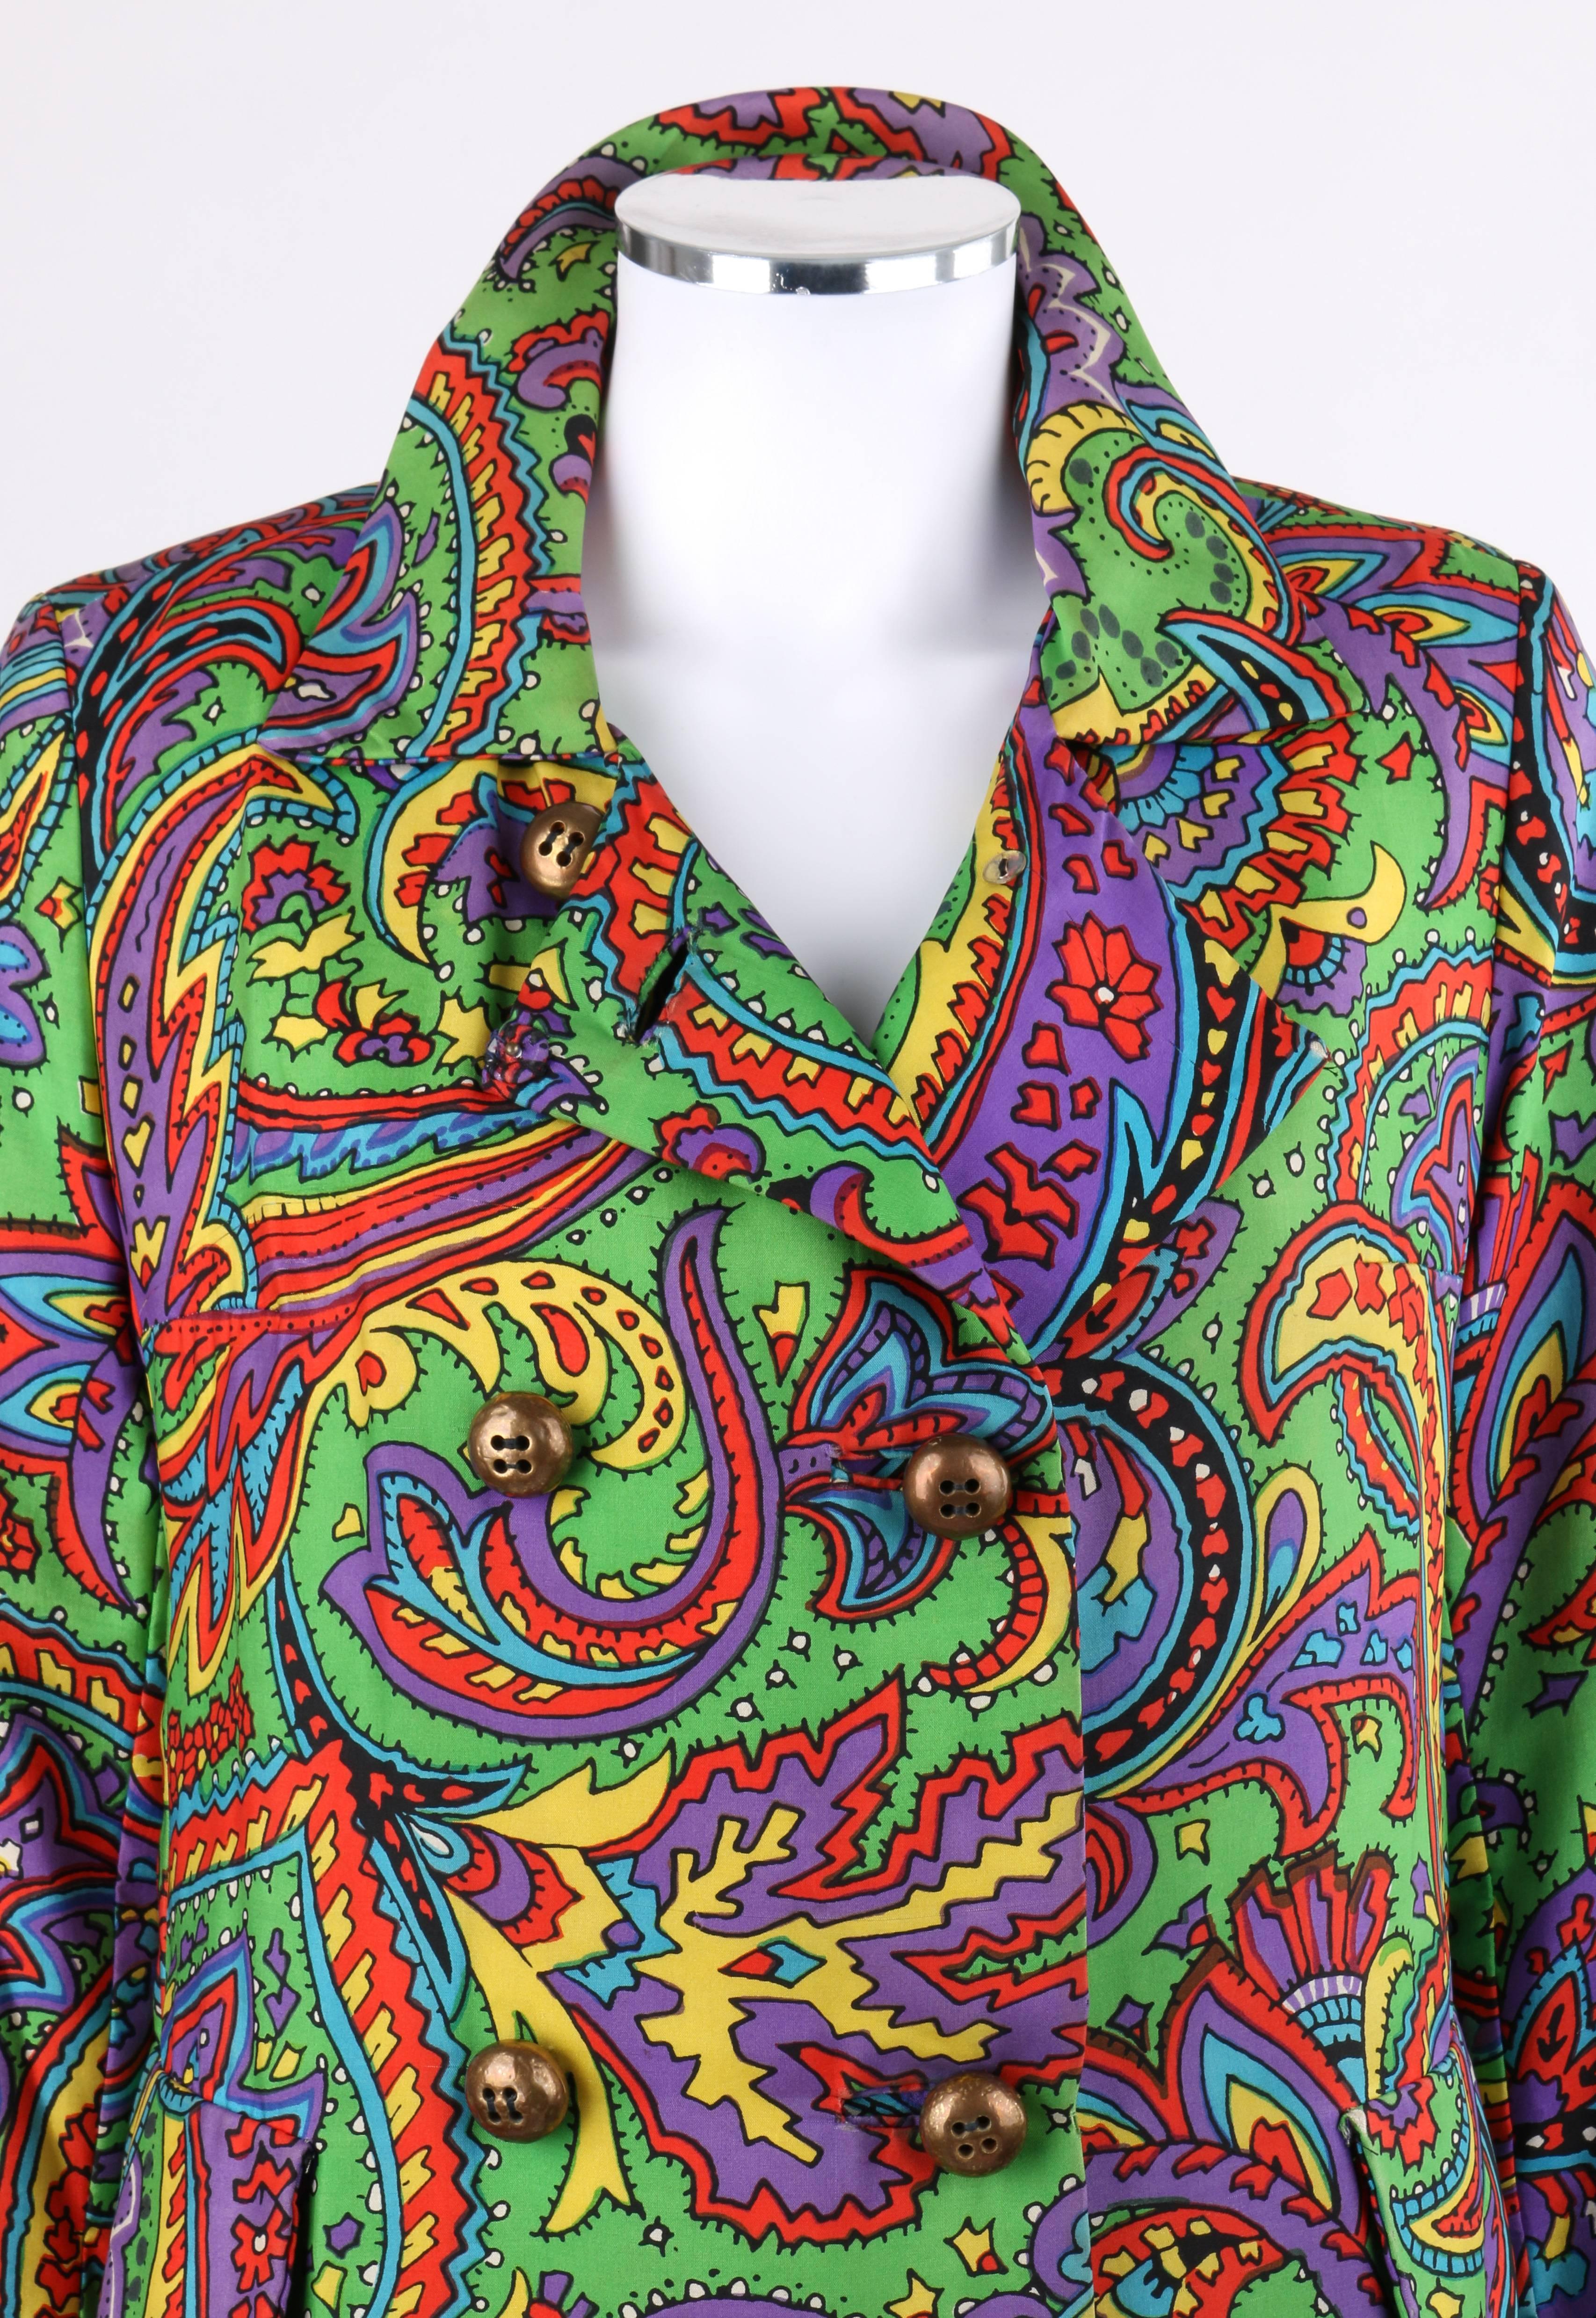 Vintage Bill Blass for Bond Street c.1970's multi-color paisley print double breasted coat. Bold multi-color paisley print in shades of red, yellow, purple, blue, black, and white on green. Bal collar. Long sleeves. Six gold-toned metal double